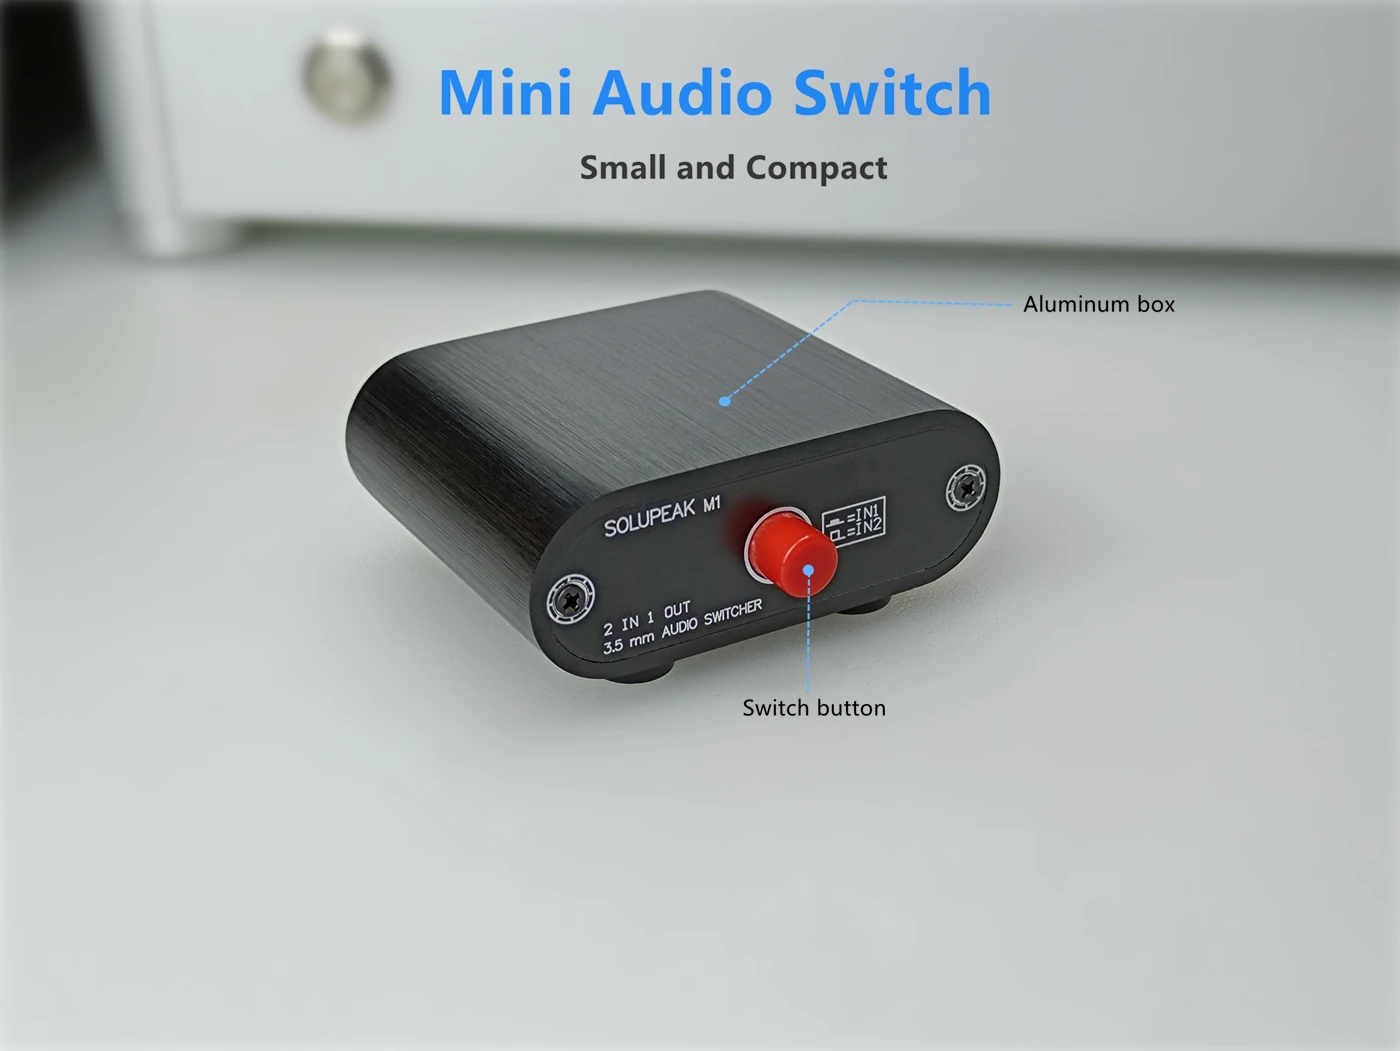 2 in 1 out 3.5 mm stereo audio switch box, 1/8 audio source input signal switcher speaker selector splitter Box